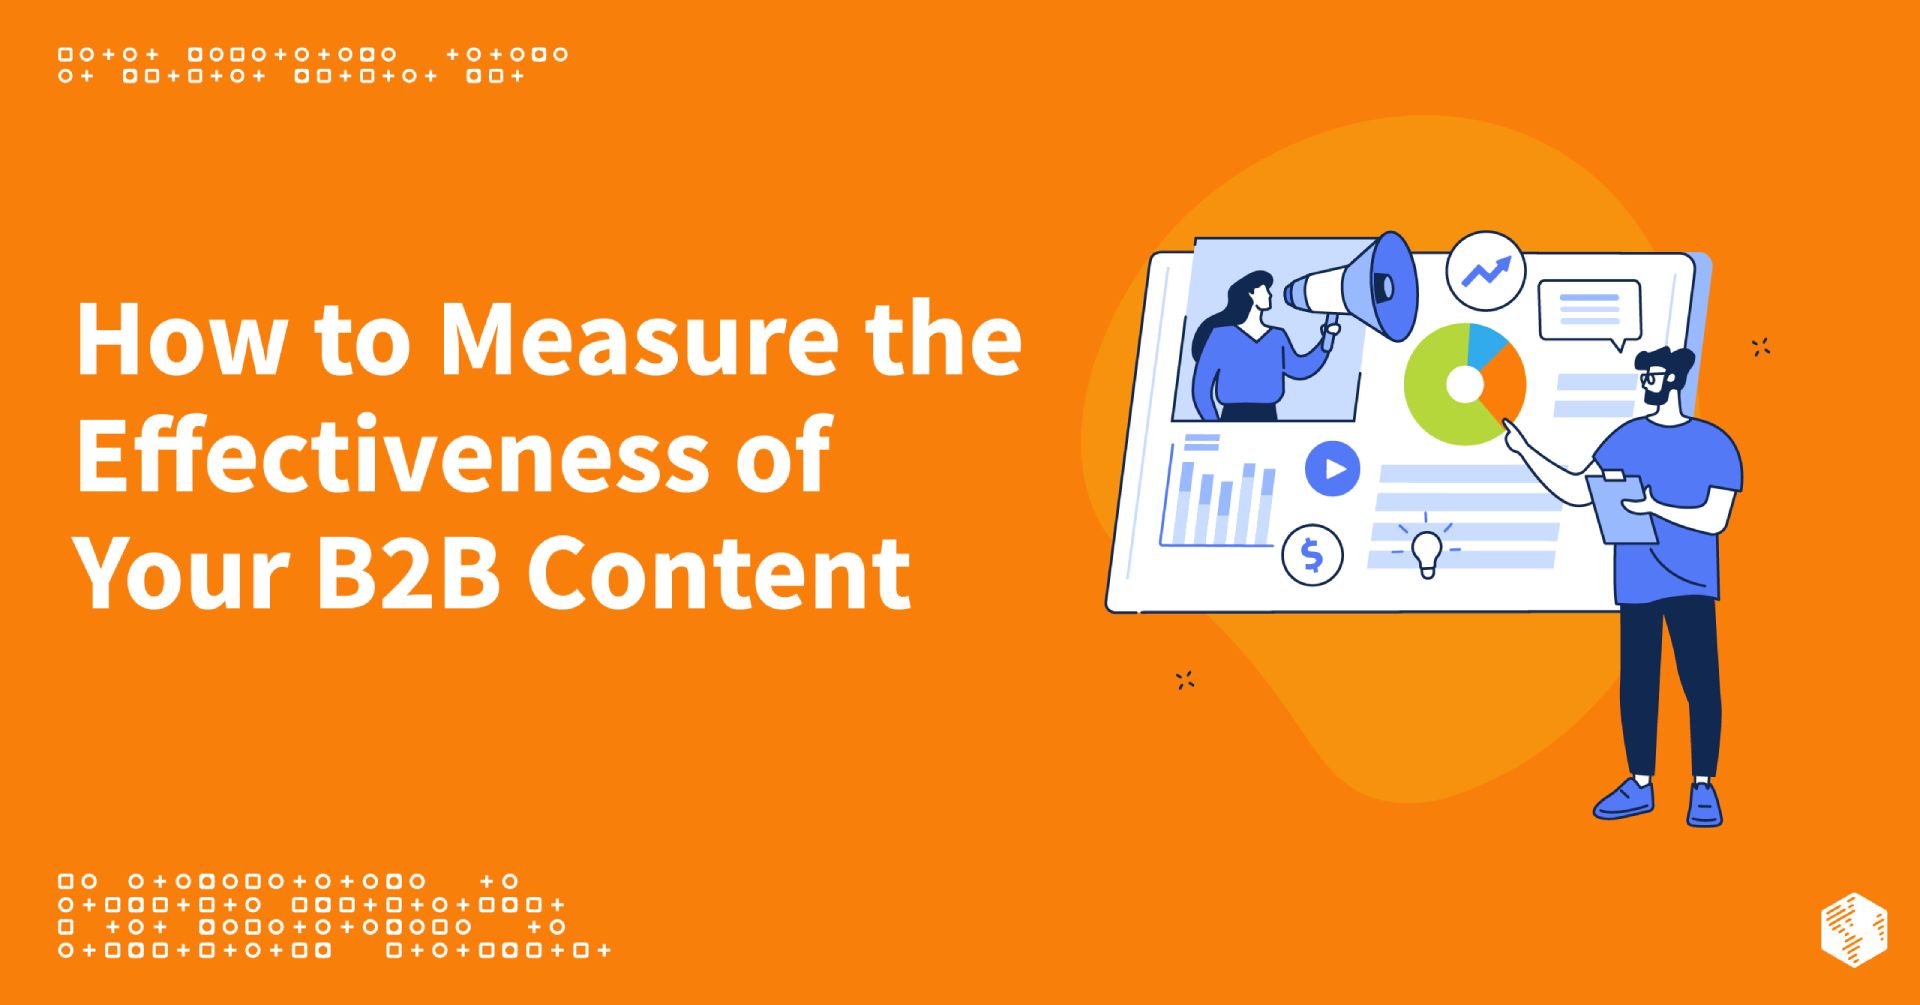 How to Measure the Effectiveness of Your B2B Content